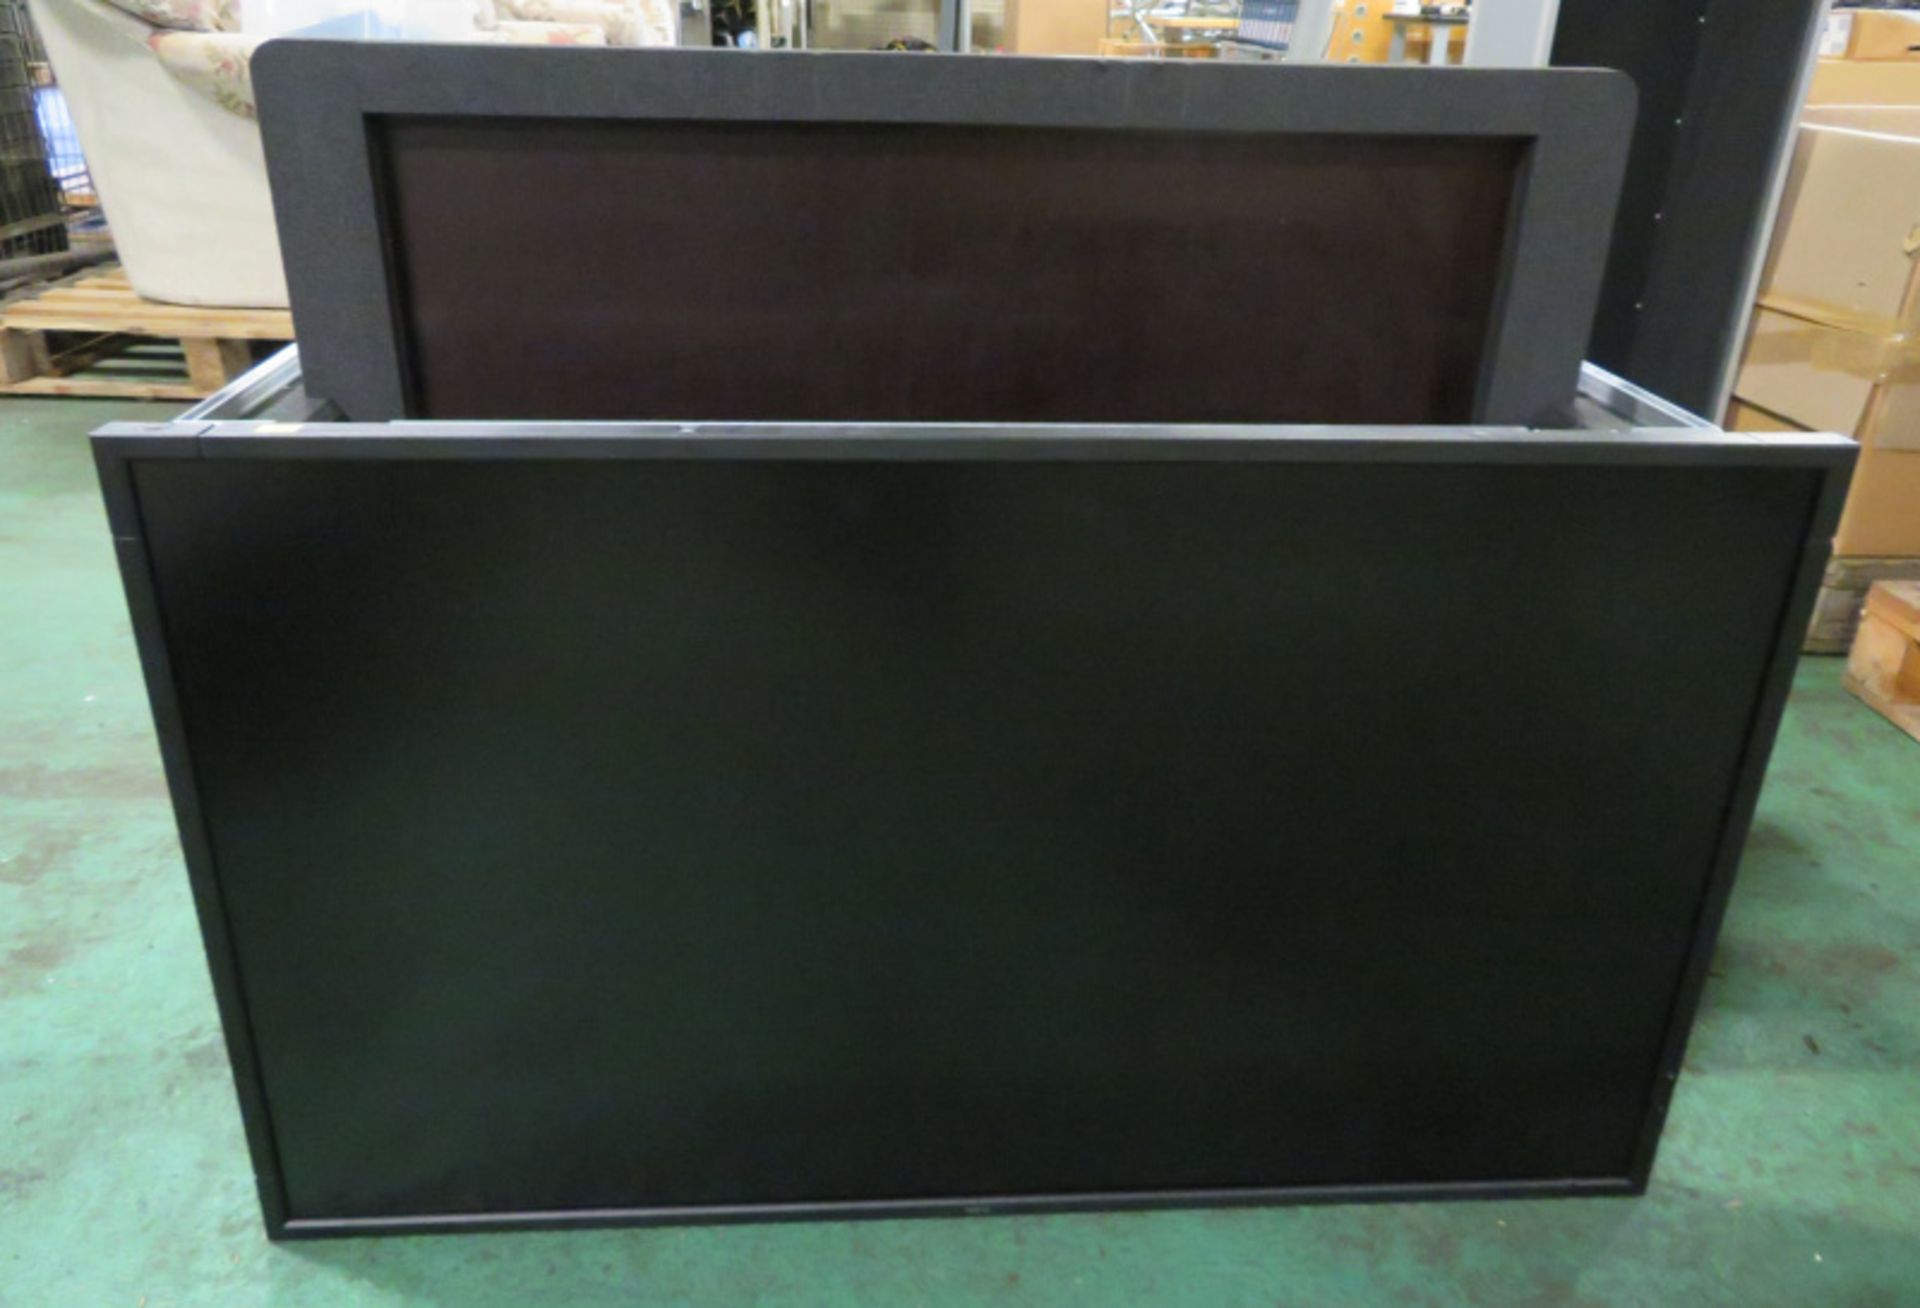 NEC P463 MultiSync 46in LCD Monitor & Transport Case - W 1210mm x D 390mm x H 850mm - Image 2 of 6